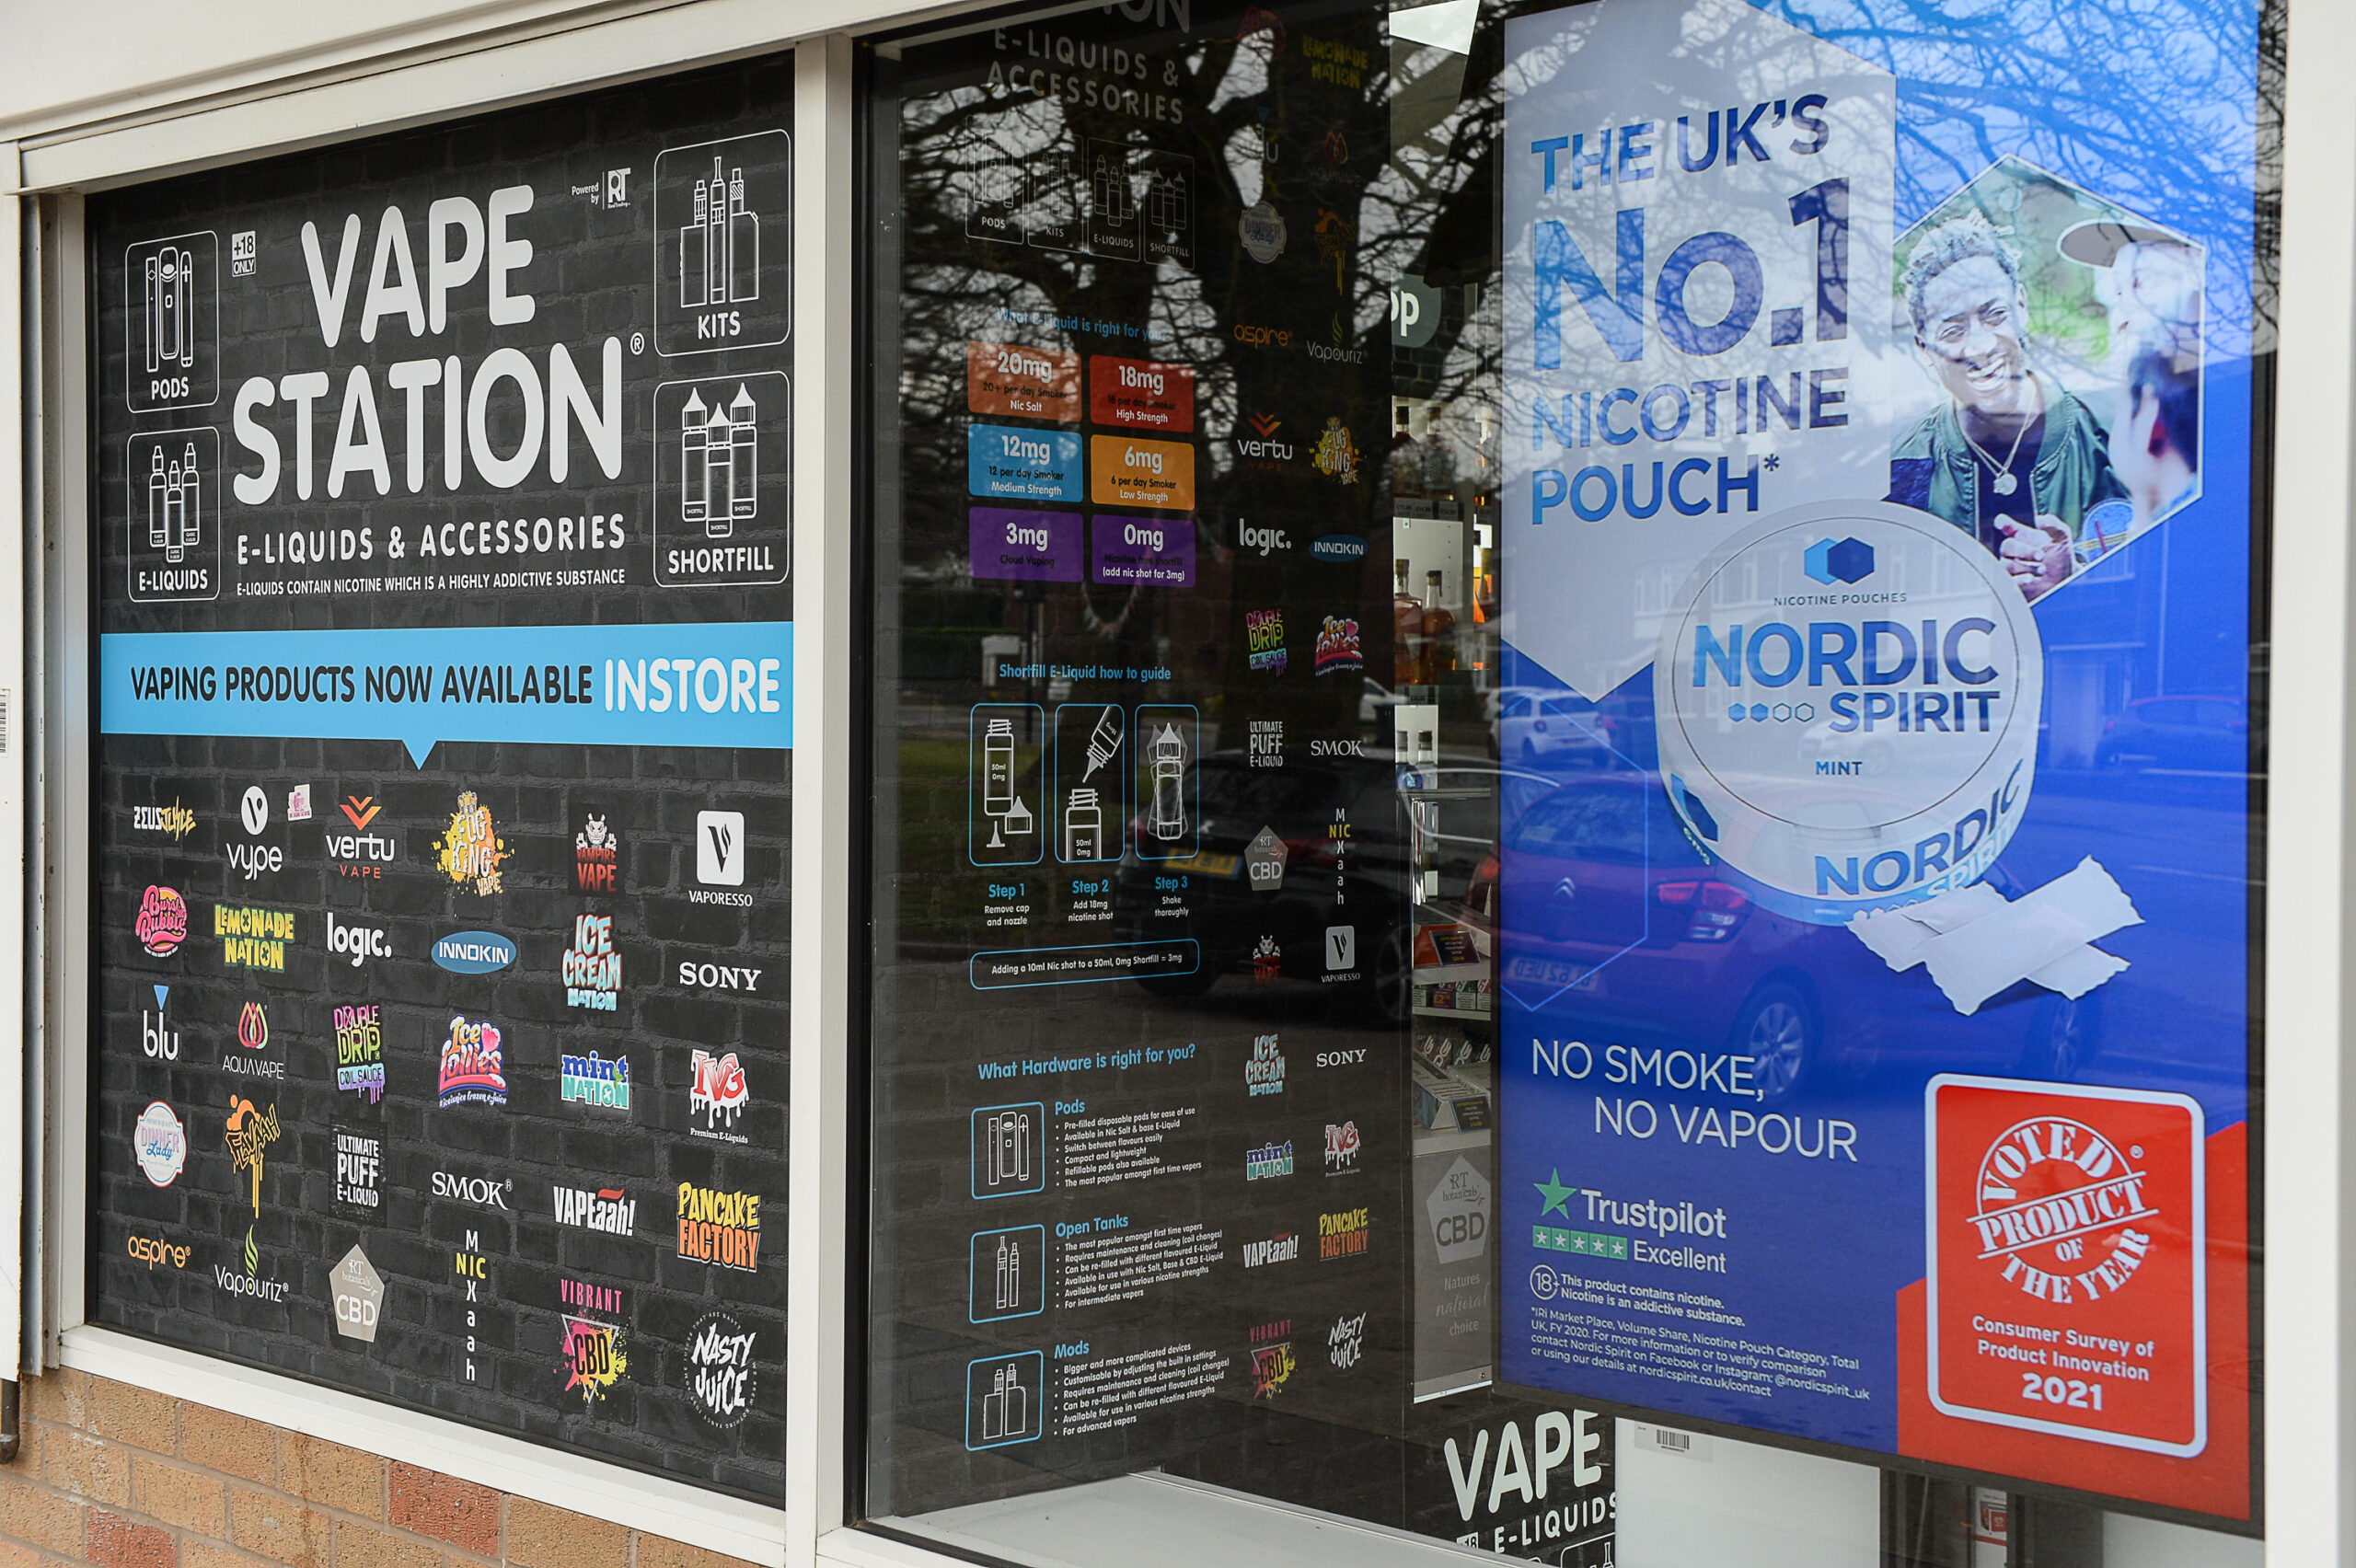 Industry body reacts to proposed Scottish regulatory measures for e-cigarettes